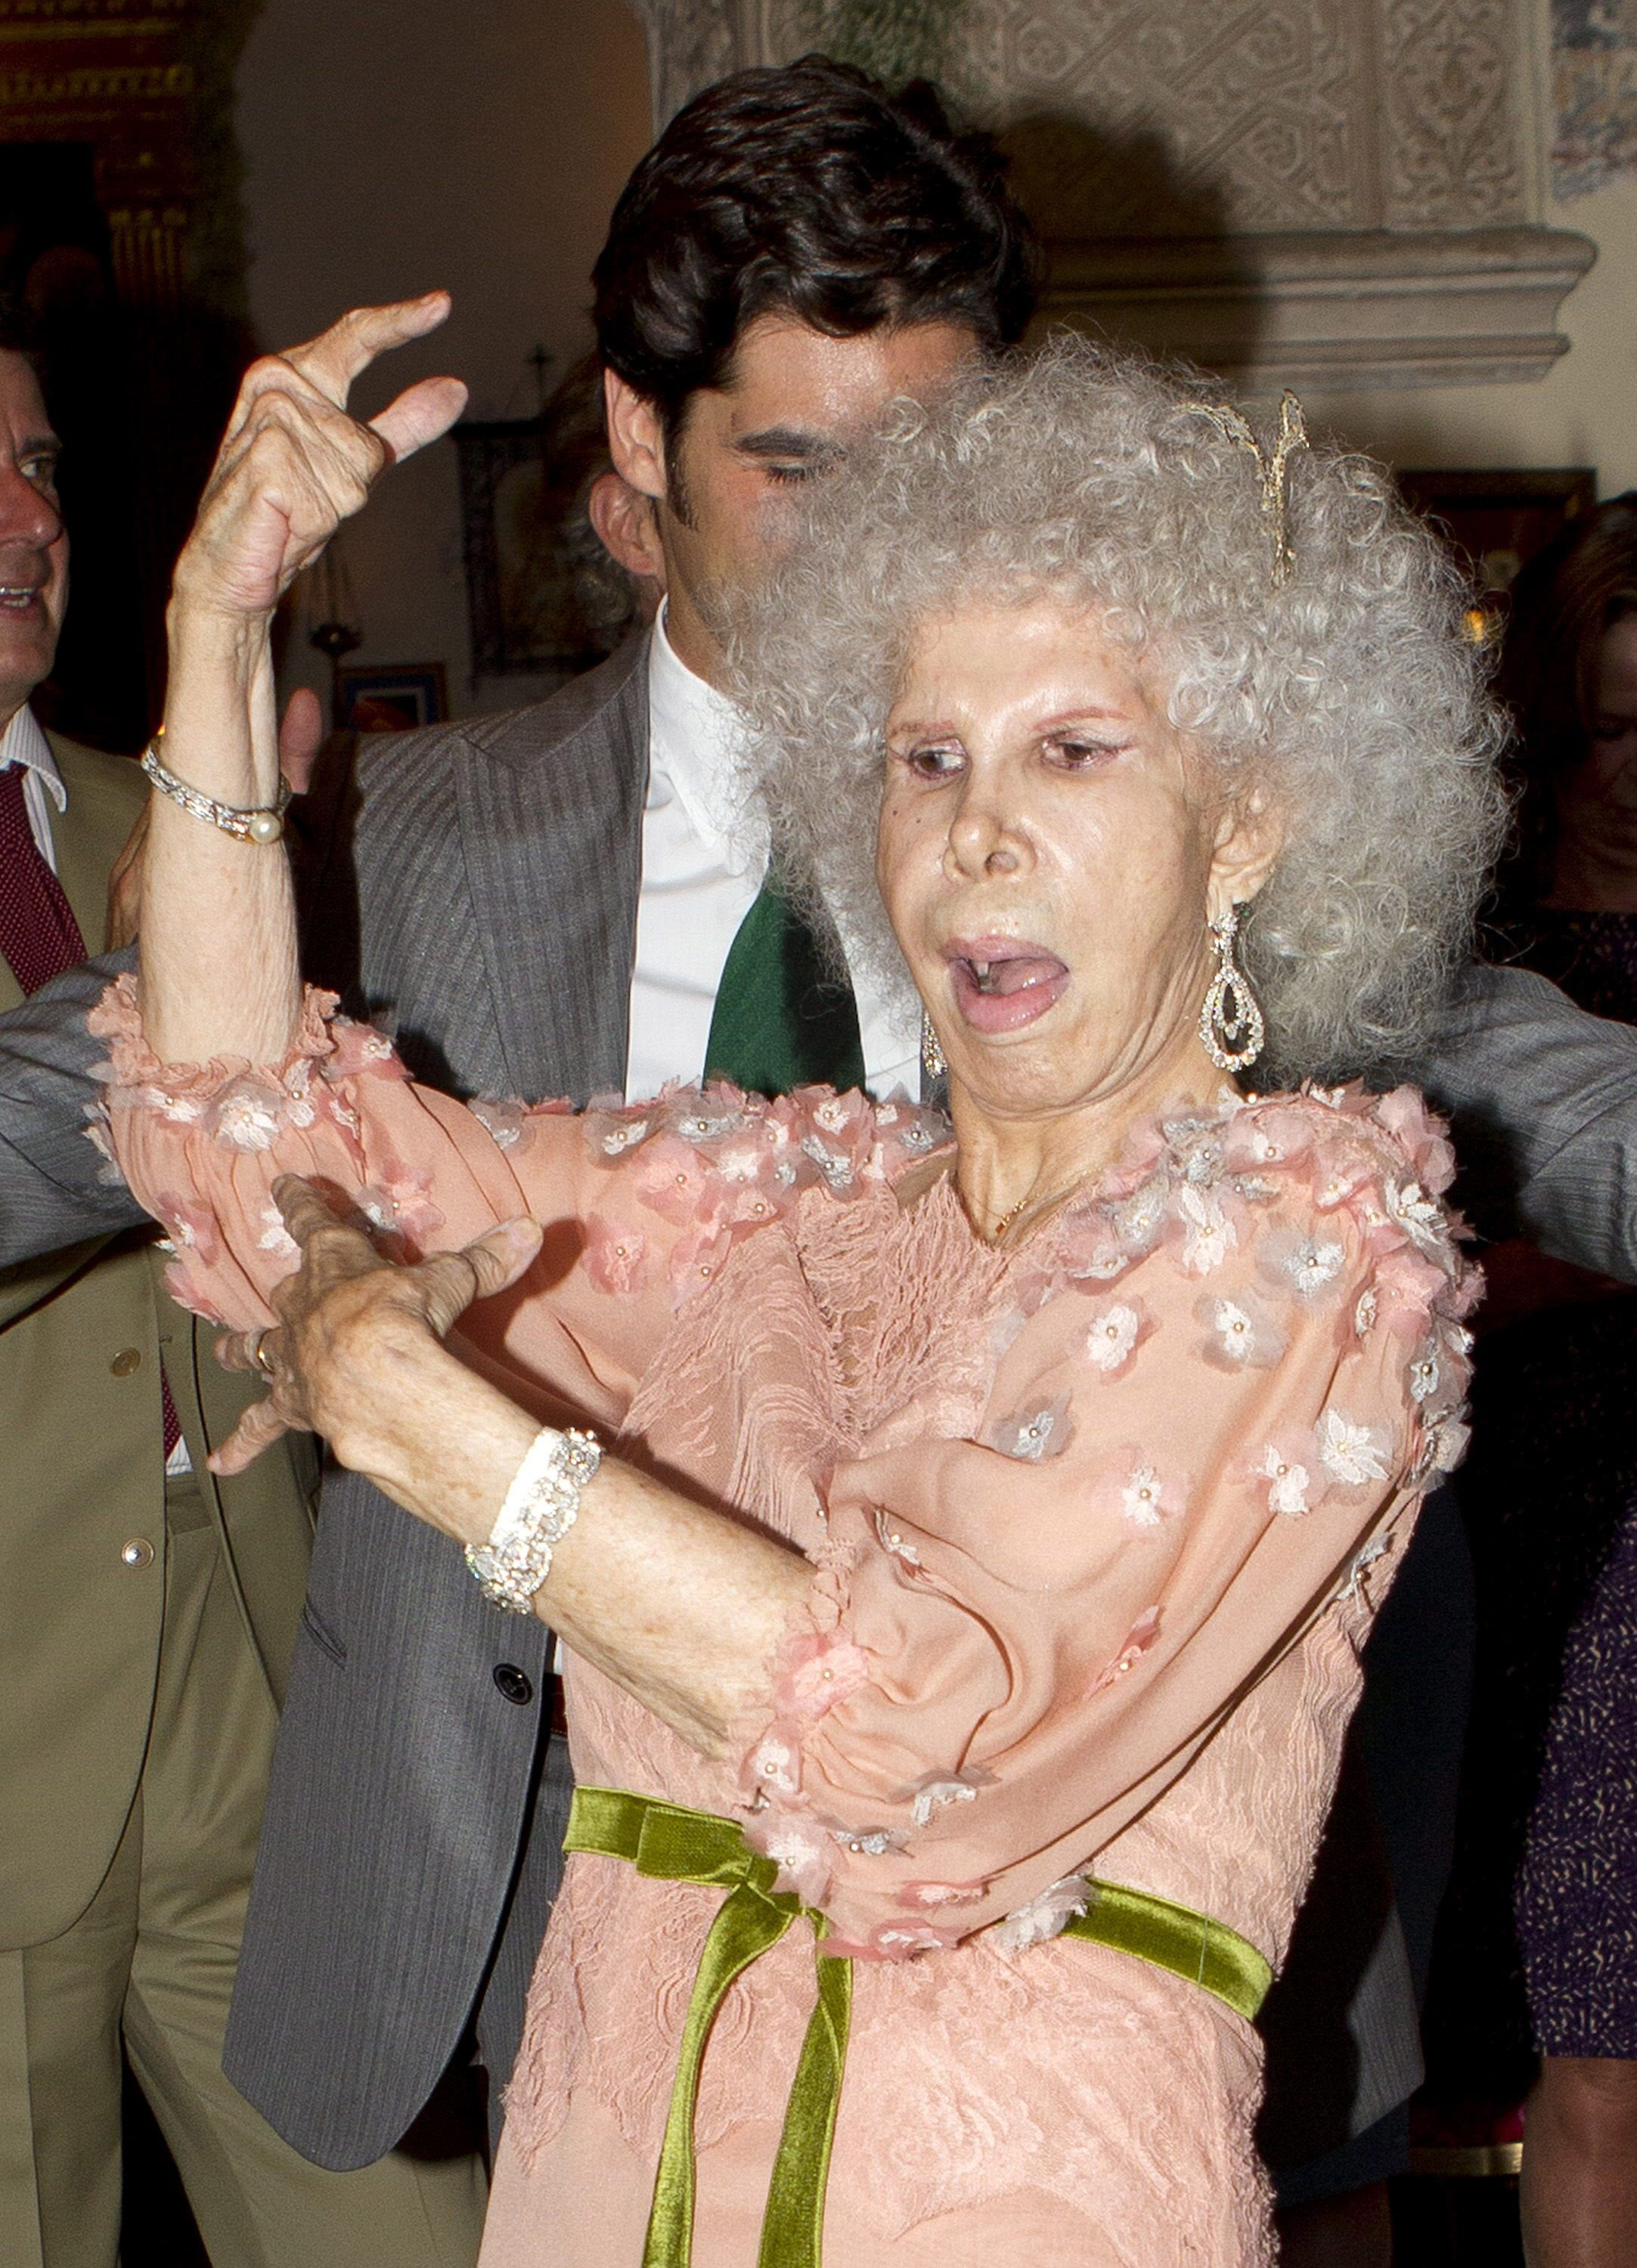 The Duchess of Alba, Maria del Rosario Cayetana Fitz-James-Stuart dancing at her wedding in Seville, Spain on October 5, 2011 | Source: Getty Images